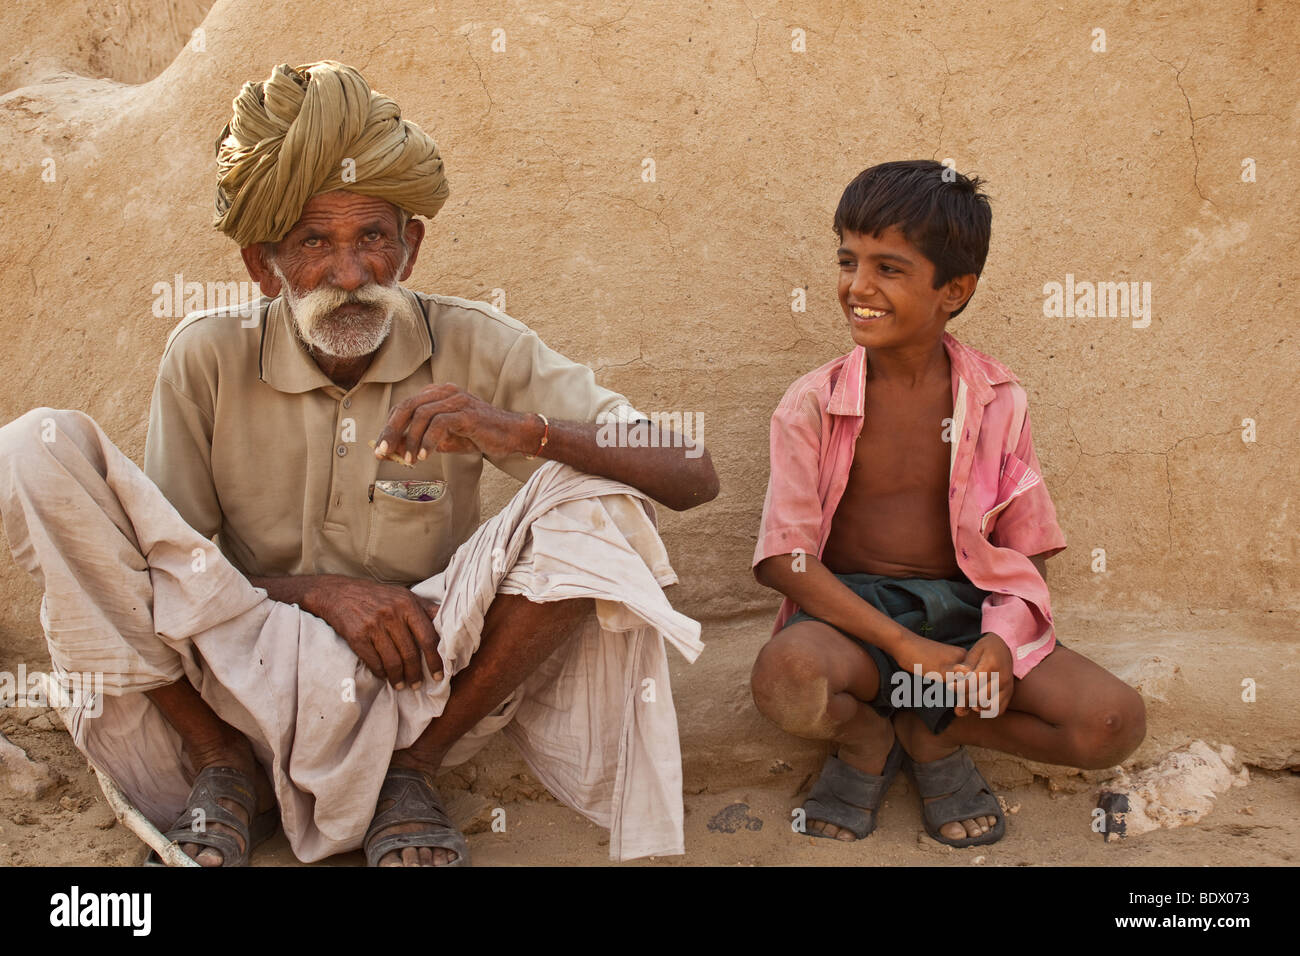 Thar Desert, India  An old Rajput villager smokes a beedi cigarette while a young boy smiles and looks on. Stock Photo